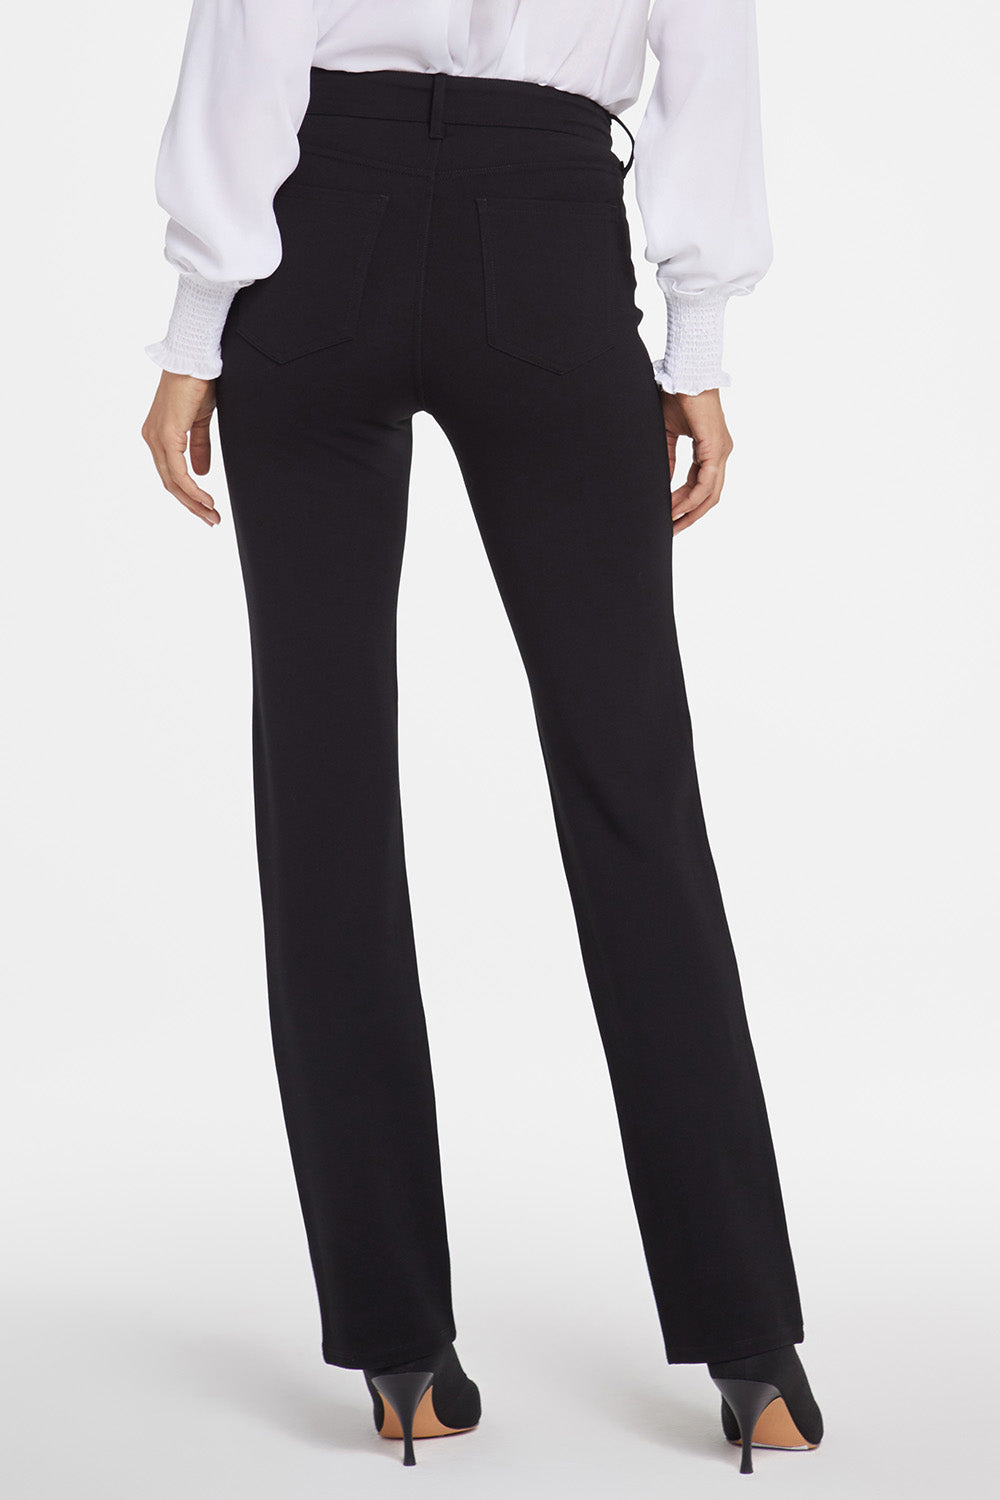 Marilyn Straight Pants Sculpt-Her™ Collection - Black Black